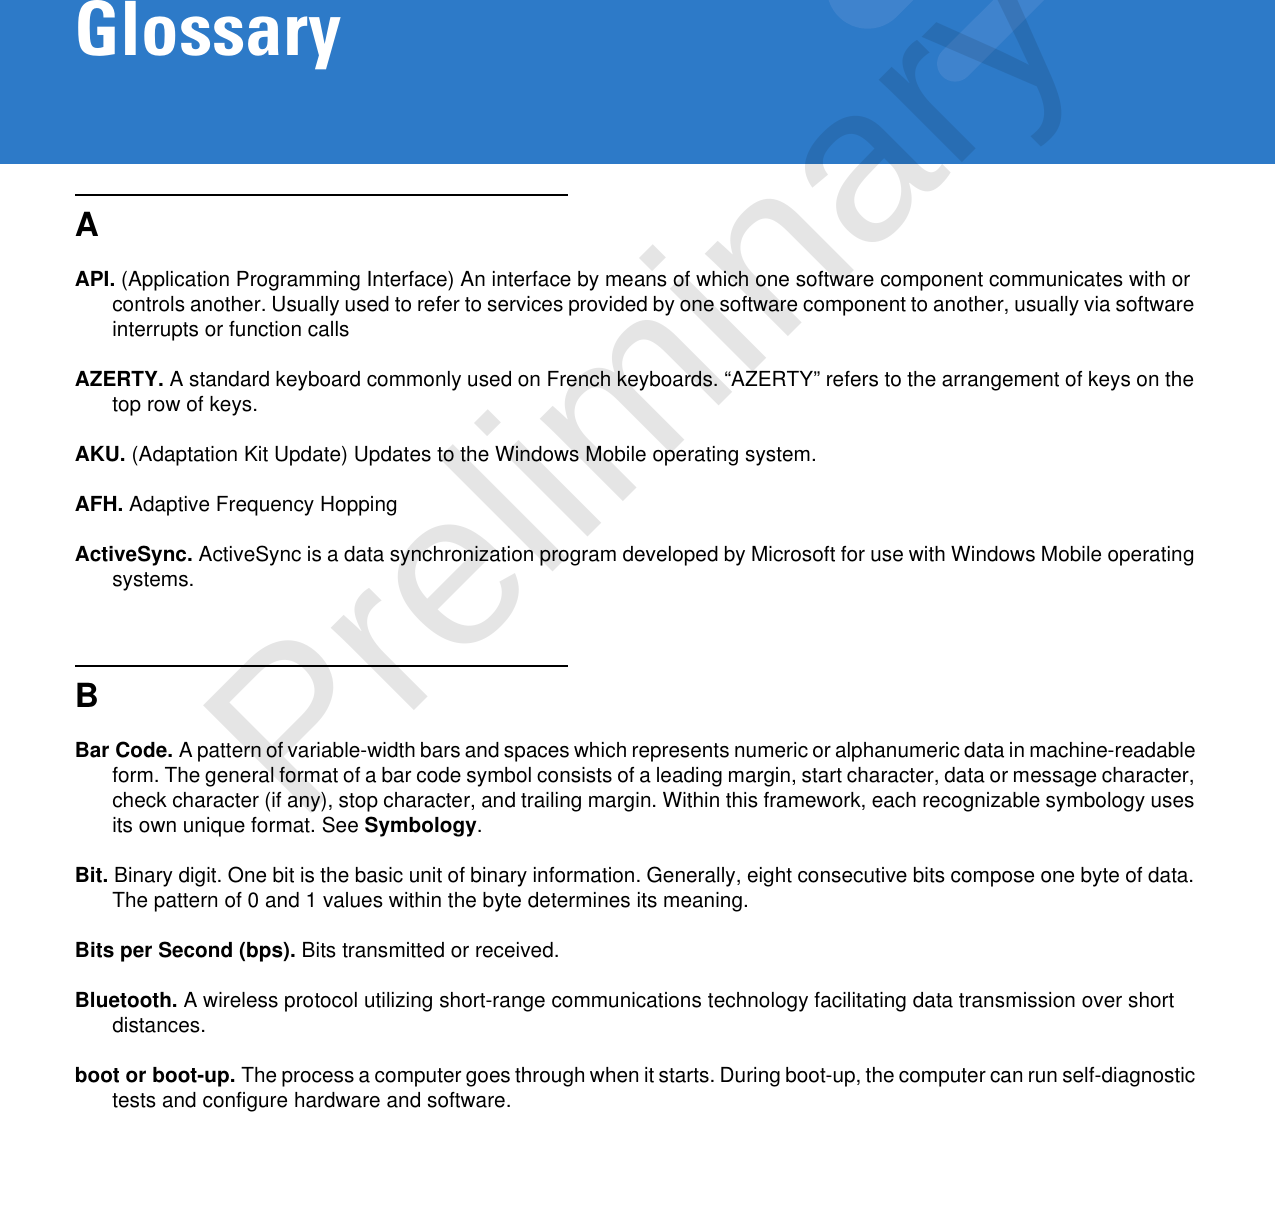 GlossaryAAPI. (Application Programming Interface) An interface by means of which one software component communicates with or controls another. Usually used to refer to services provided by one software component to another, usually via software interrupts or function callsAZERTY. A standard keyboard commonly used on French keyboards. “AZERTY” refers to the arrangement of keys on the top row of keys.AKU. (Adaptation Kit Update) Updates to the Windows Mobile operating system.AFH. Adaptive Frequency HoppingActiveSync. ActiveSync is a data synchronization program developed by Microsoft for use with Windows Mobile operating systems.BBar Code. A pattern of variable-width bars and spaces which represents numeric or alphanumeric data in machine-readable form. The general format of a bar code symbol consists of a leading margin, start character, data or message character, check character (if any), stop character, and trailing margin. Within this framework, each recognizable symbology uses its own unique format. See Symbology.Bit. Binary digit. One bit is the basic unit of binary information. Generally, eight consecutive bits compose one byte of data. The pattern of 0 and 1 values within the byte determines its meaning.Bits per Second (bps). Bits transmitted or received.Bluetooth. A wireless protocol utilizing short-range communications technology facilitating data transmission over short distances.boot or boot-up. The process a computer goes through when it starts. During boot-up, the computer can run self-diagnostic tests and configure hardware and software.Preliminary